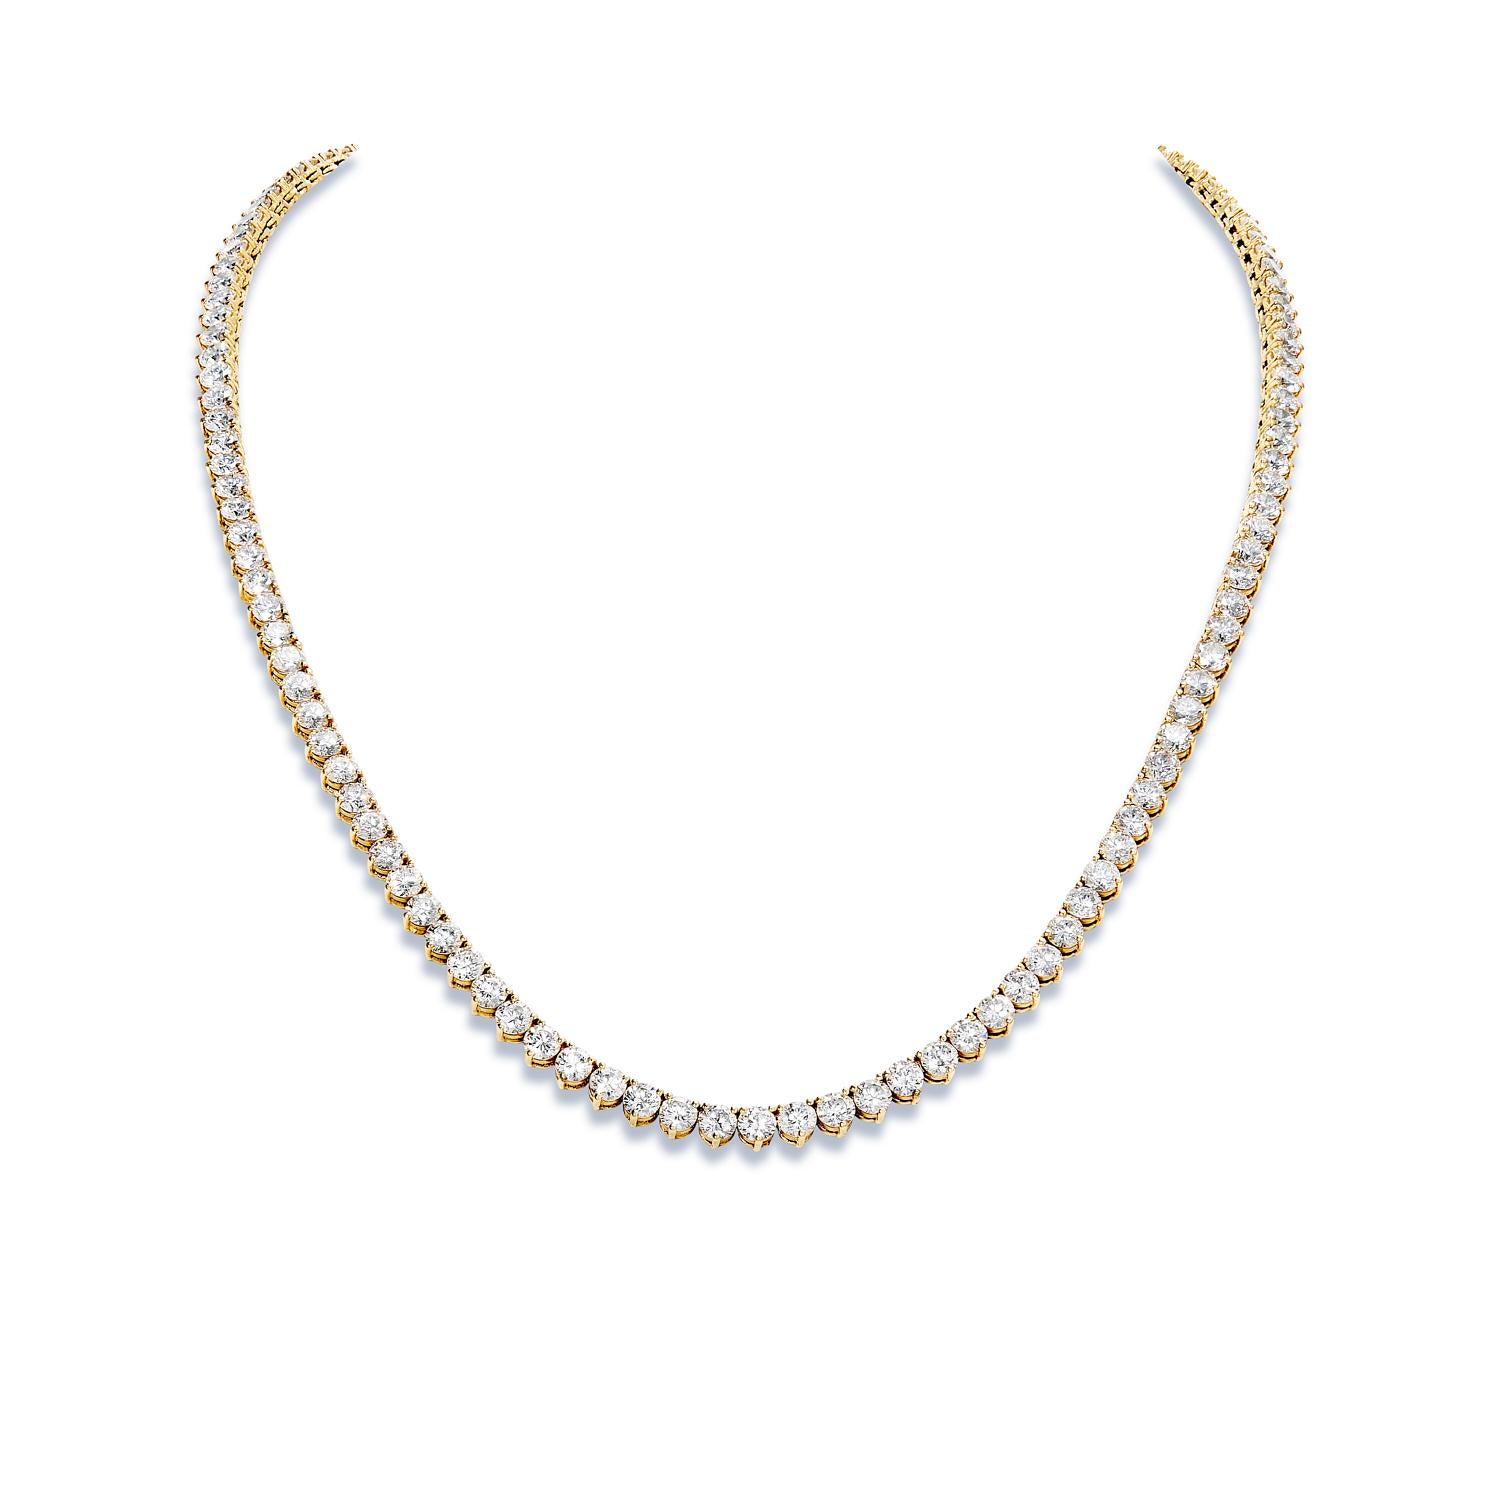 Earth Mined Diamond Opera Necklace:
Carat Weight: 47.10 Carats
Style: Round Brilliant Cut
Setting: 3 Prong
Chains: 14 Karat Yellow Gold 52.00 grams
Number of Diamonds: 154

Necklace length, 26 inches Long